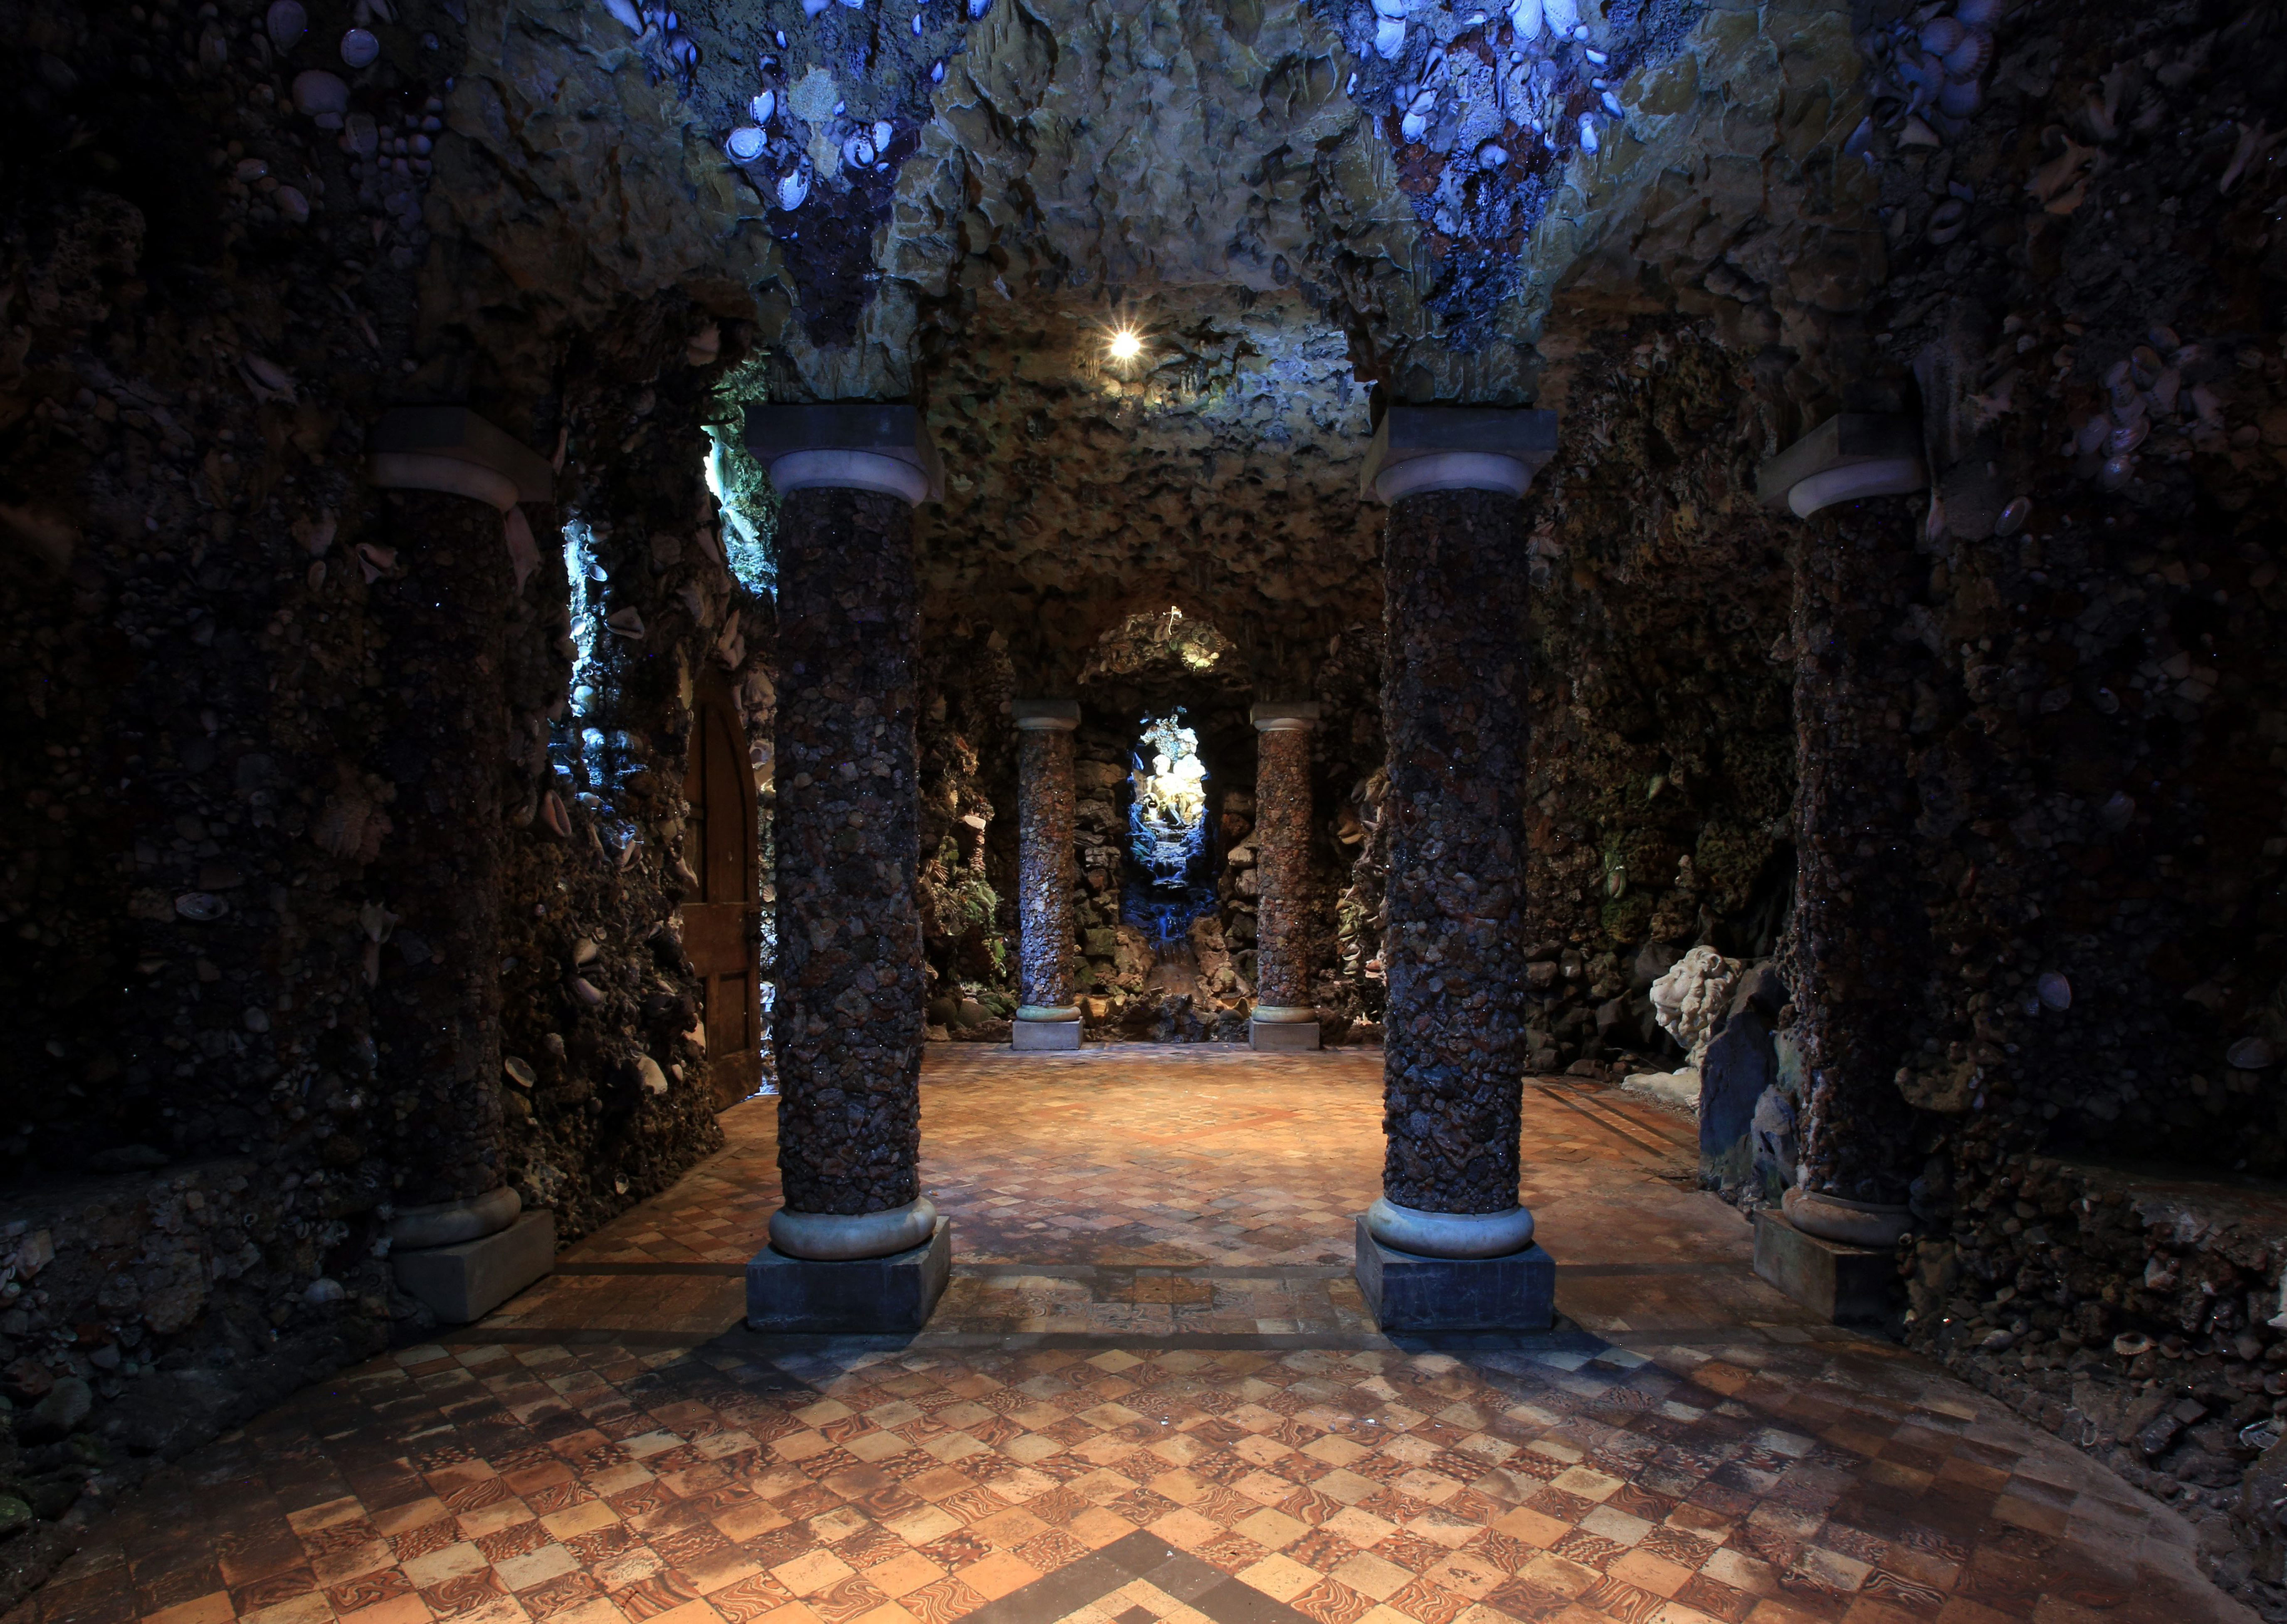 The grotto has lots of chambers divided by pillars and ornate walls